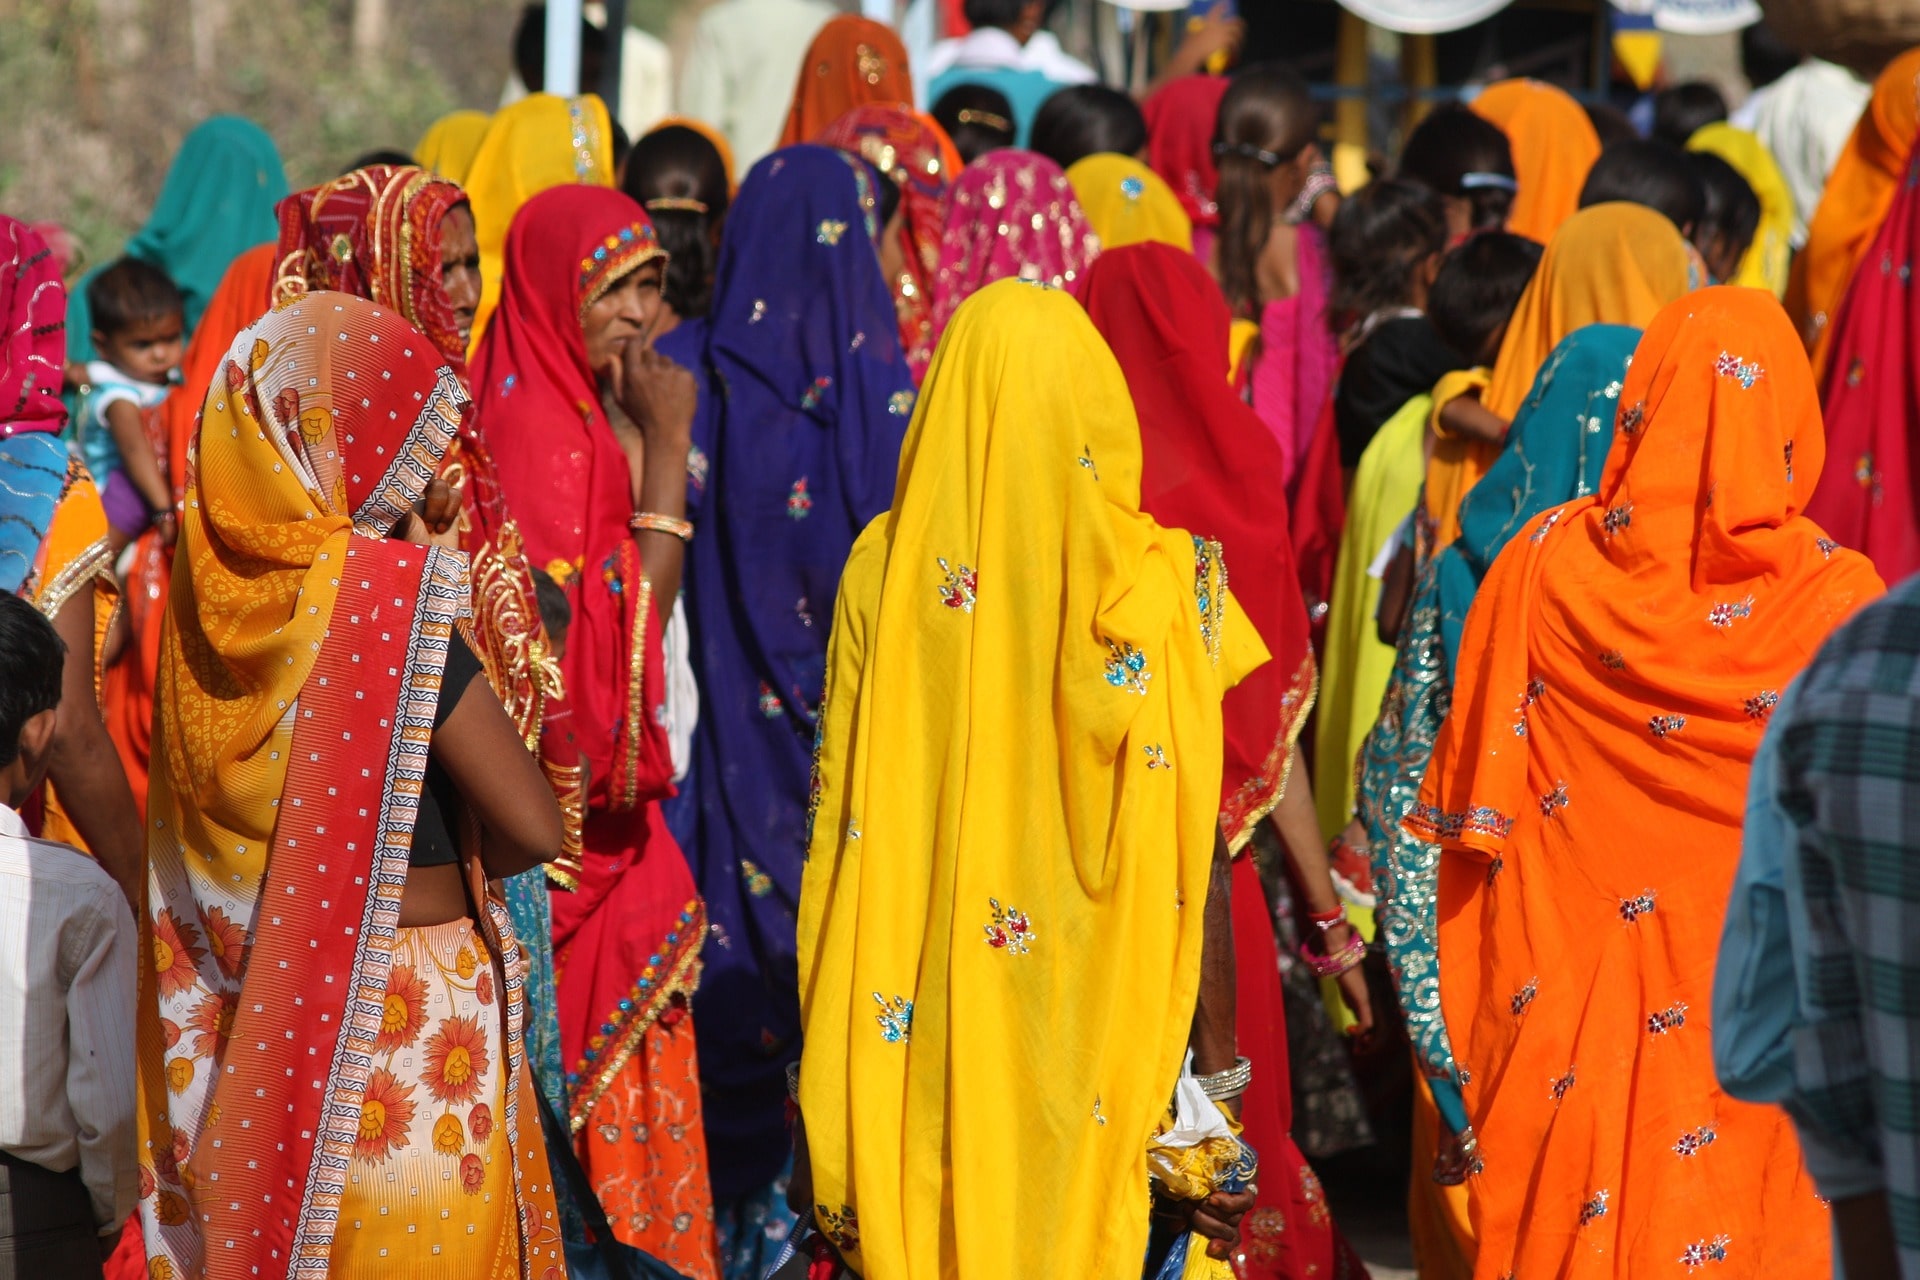 several Indian women with the multicolored veils